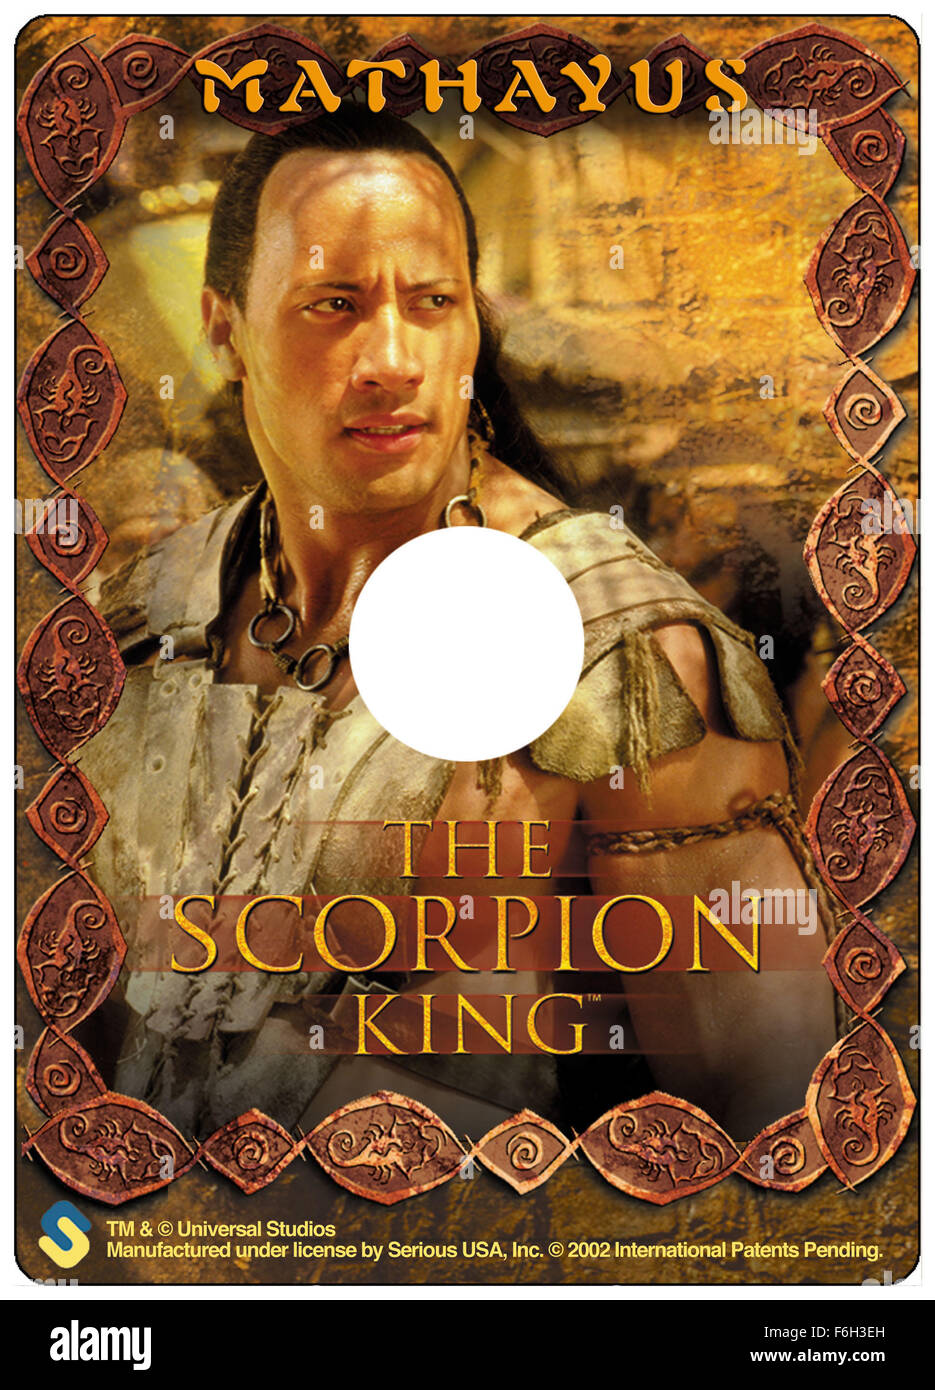 Apr 22, 2002; Hollywood, CA, USA; THE ROCK as Mathayus in the action, fantasy adventure ''The Scorpion King'' directed by Chuck Russell. Stock Photo